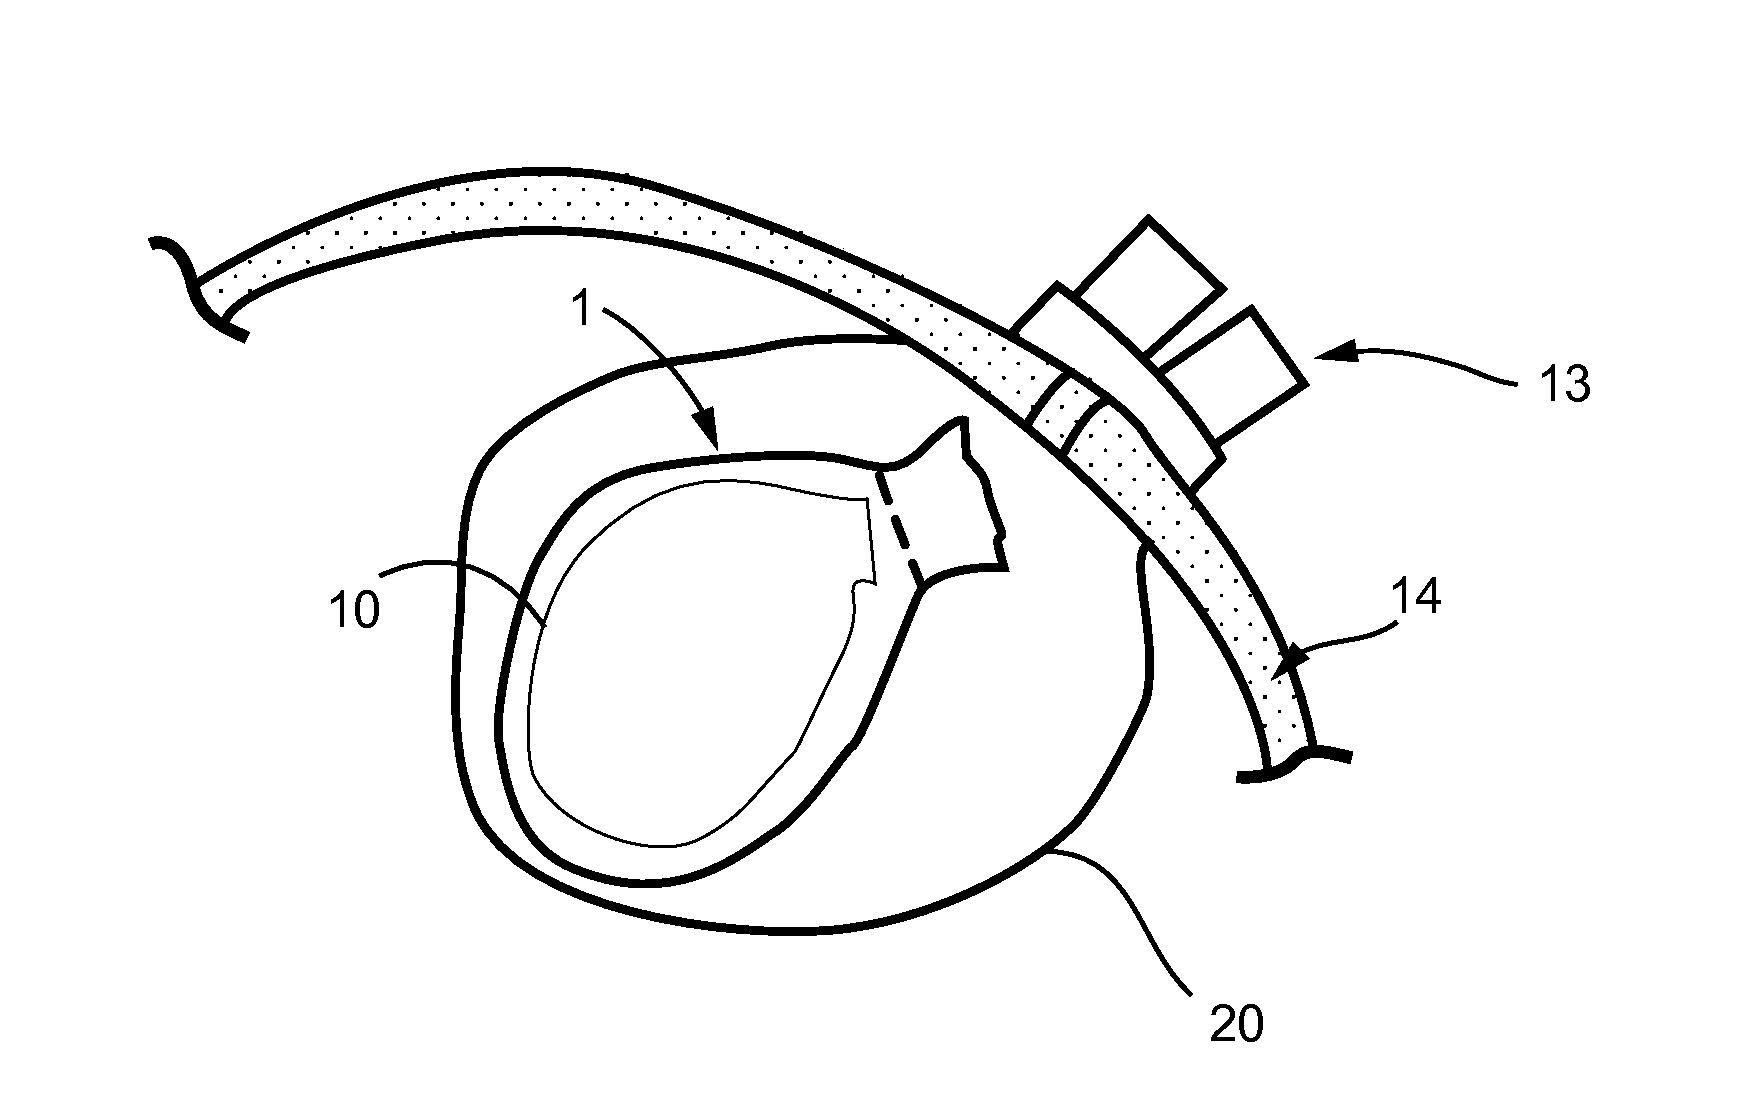 Method of amputating and morcellating a uterus